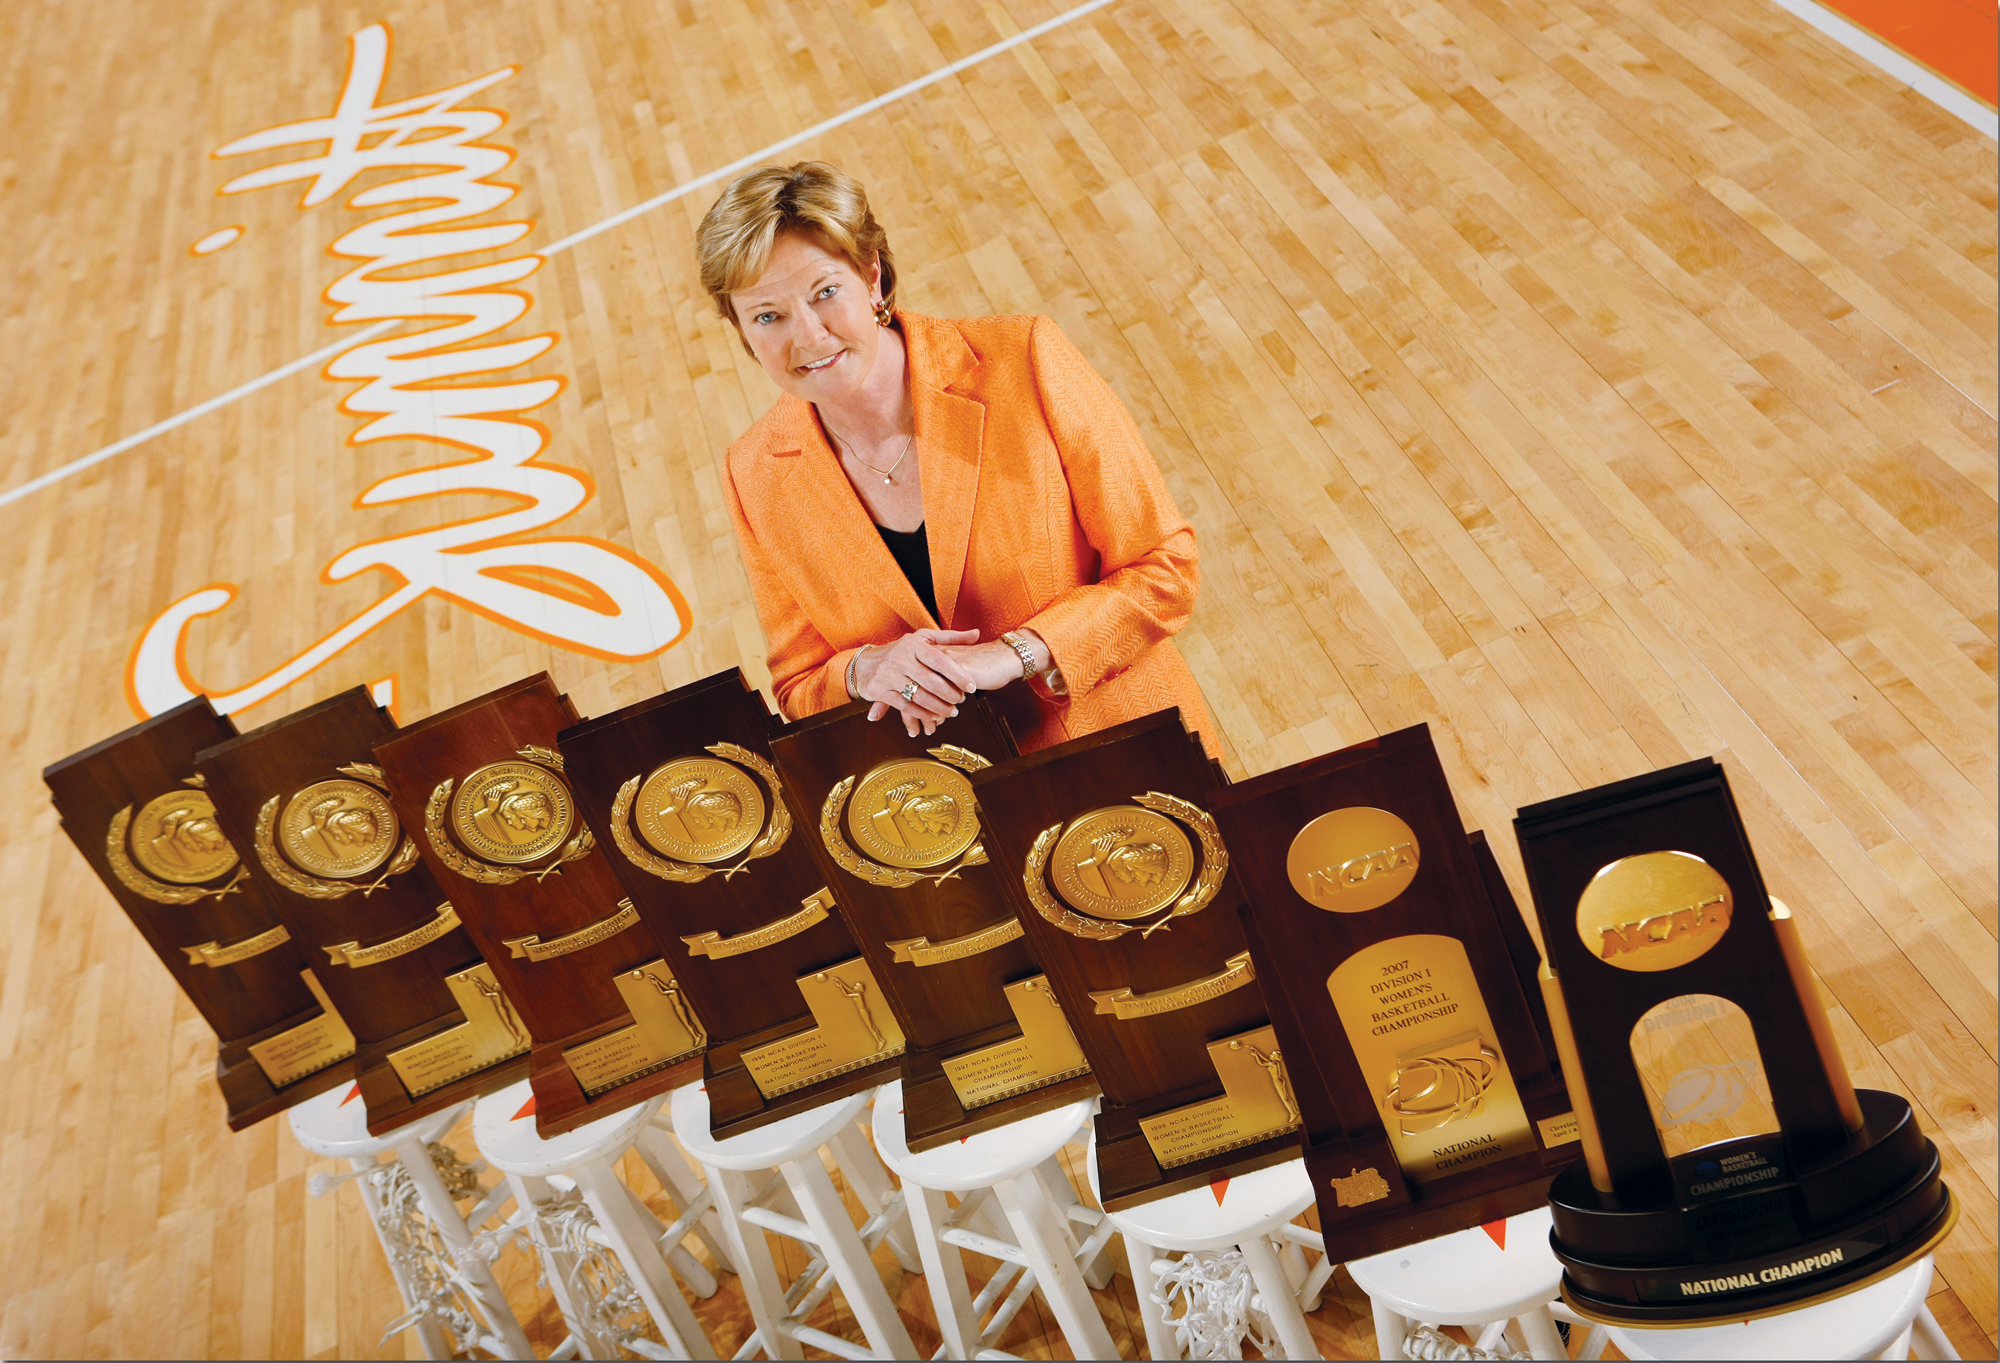 Pat Summitt pictured with her 8 NCAA championship trophies